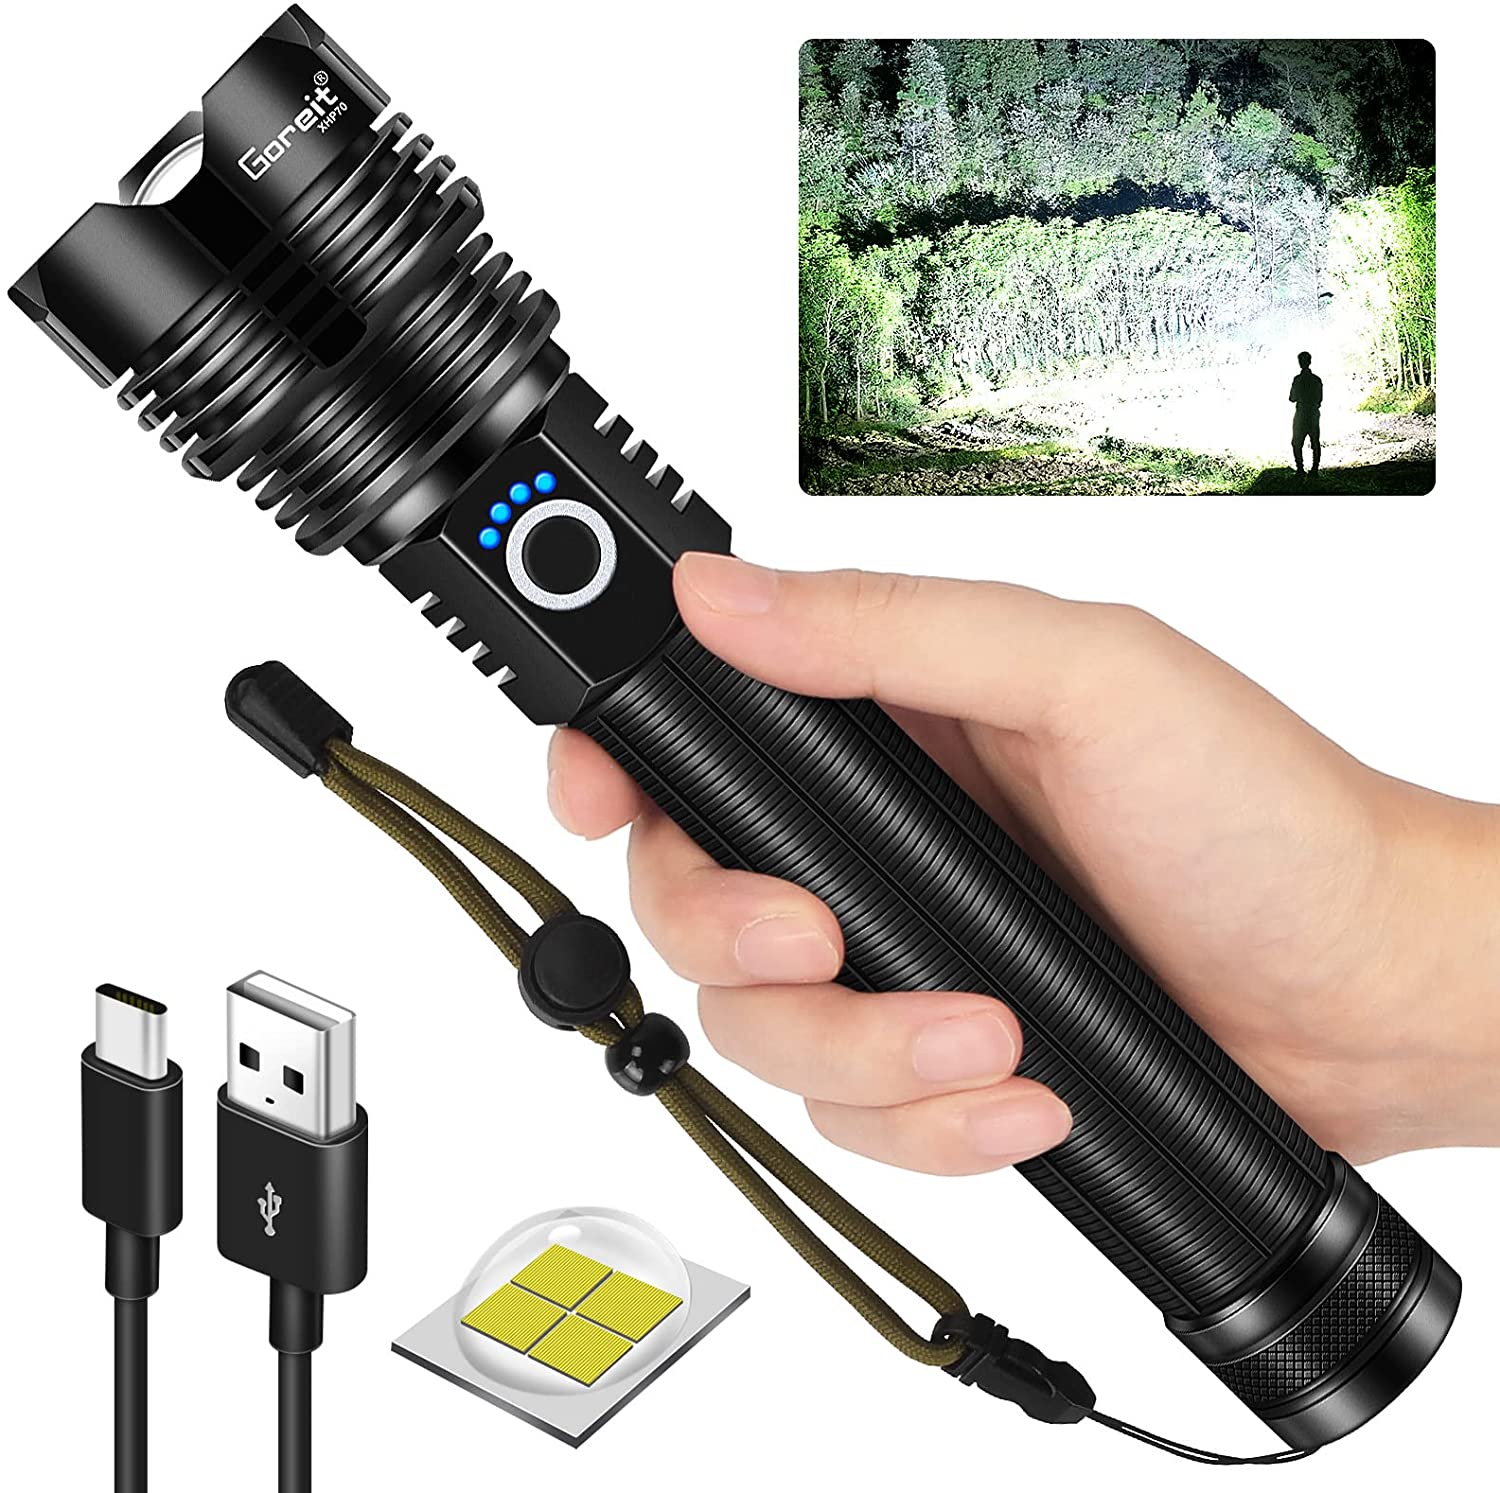 90000 lumens Powerful Led Flashlight, XHP70.2 Most Powerful Led Flashlight USB Zoom Rechargeable Torch Waterproof for Outdoor Sport - image 1 of 8